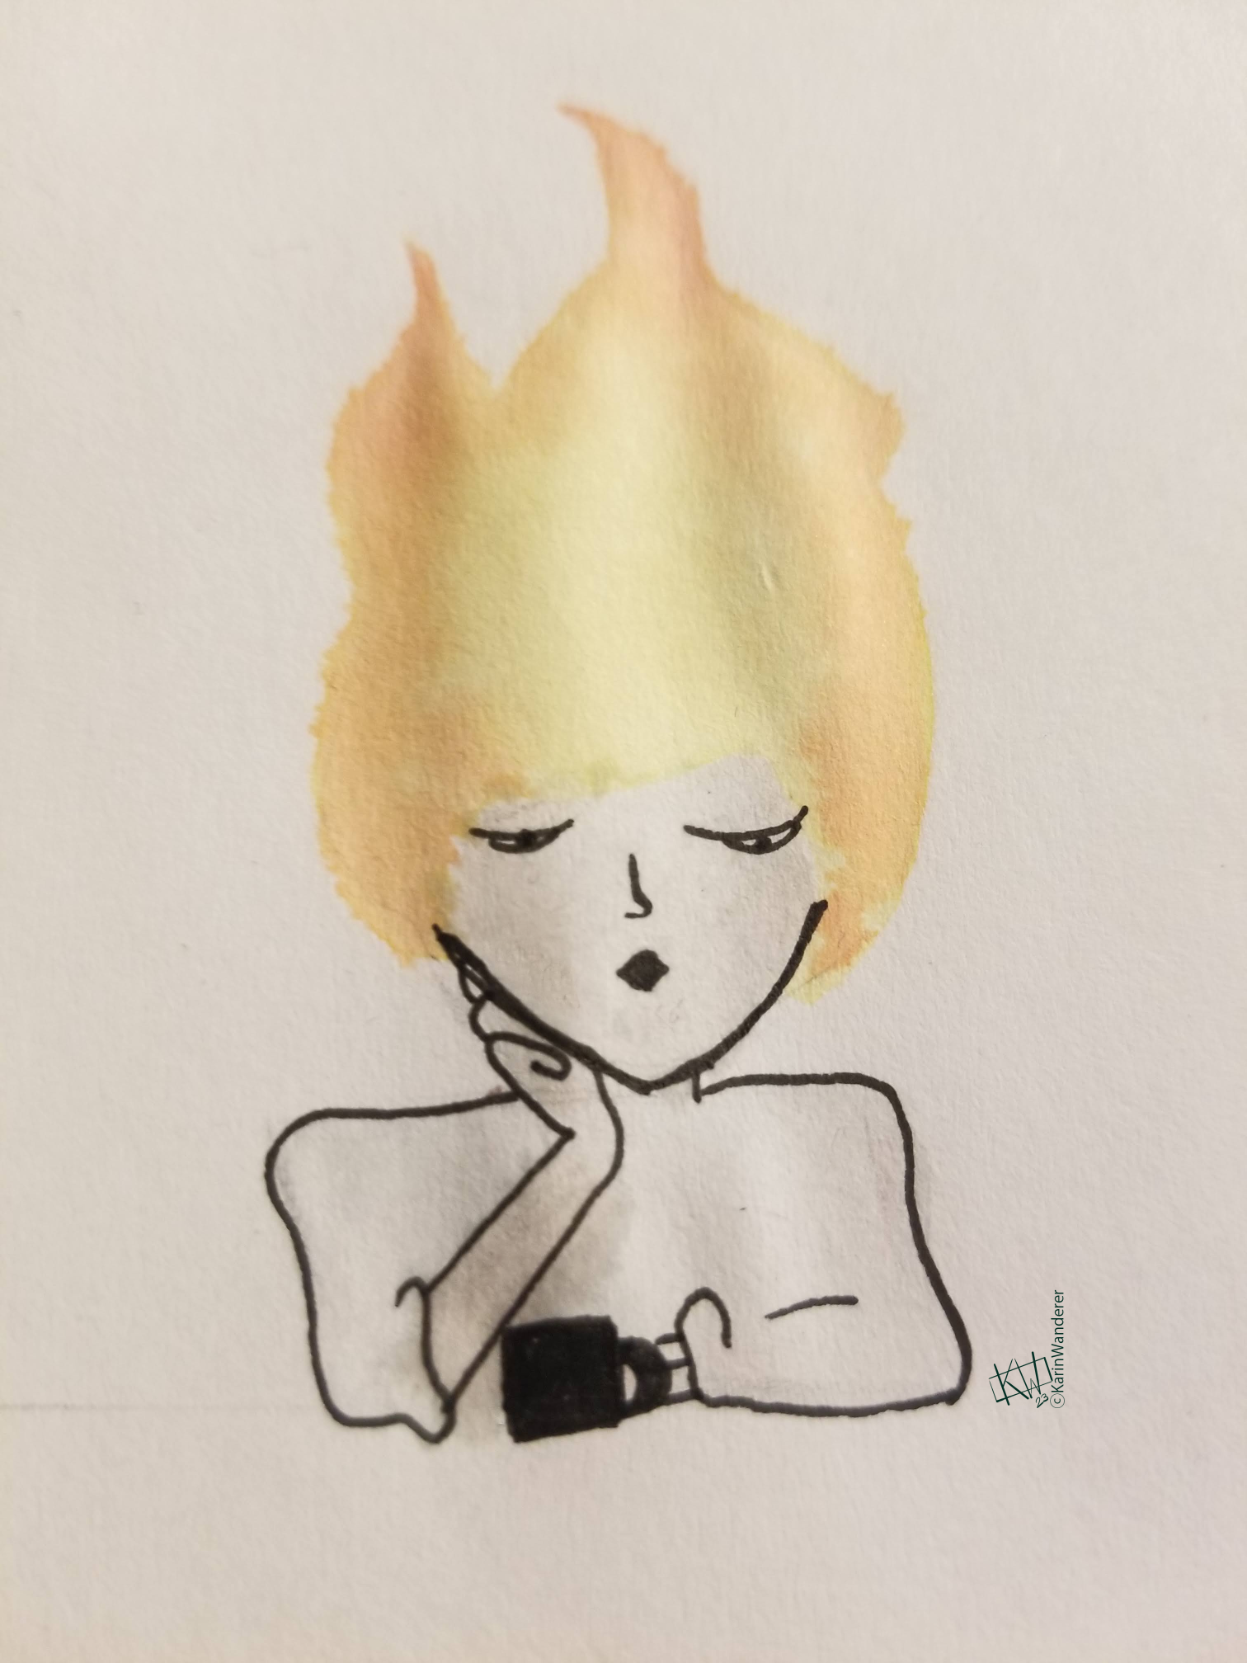 Watercolor of a woman. Her clothes and skin are washed-out. She sits resting her chin on one hand while staring listlessly at a coffee cup. Her head is on fire, but even the flames are washed-out.